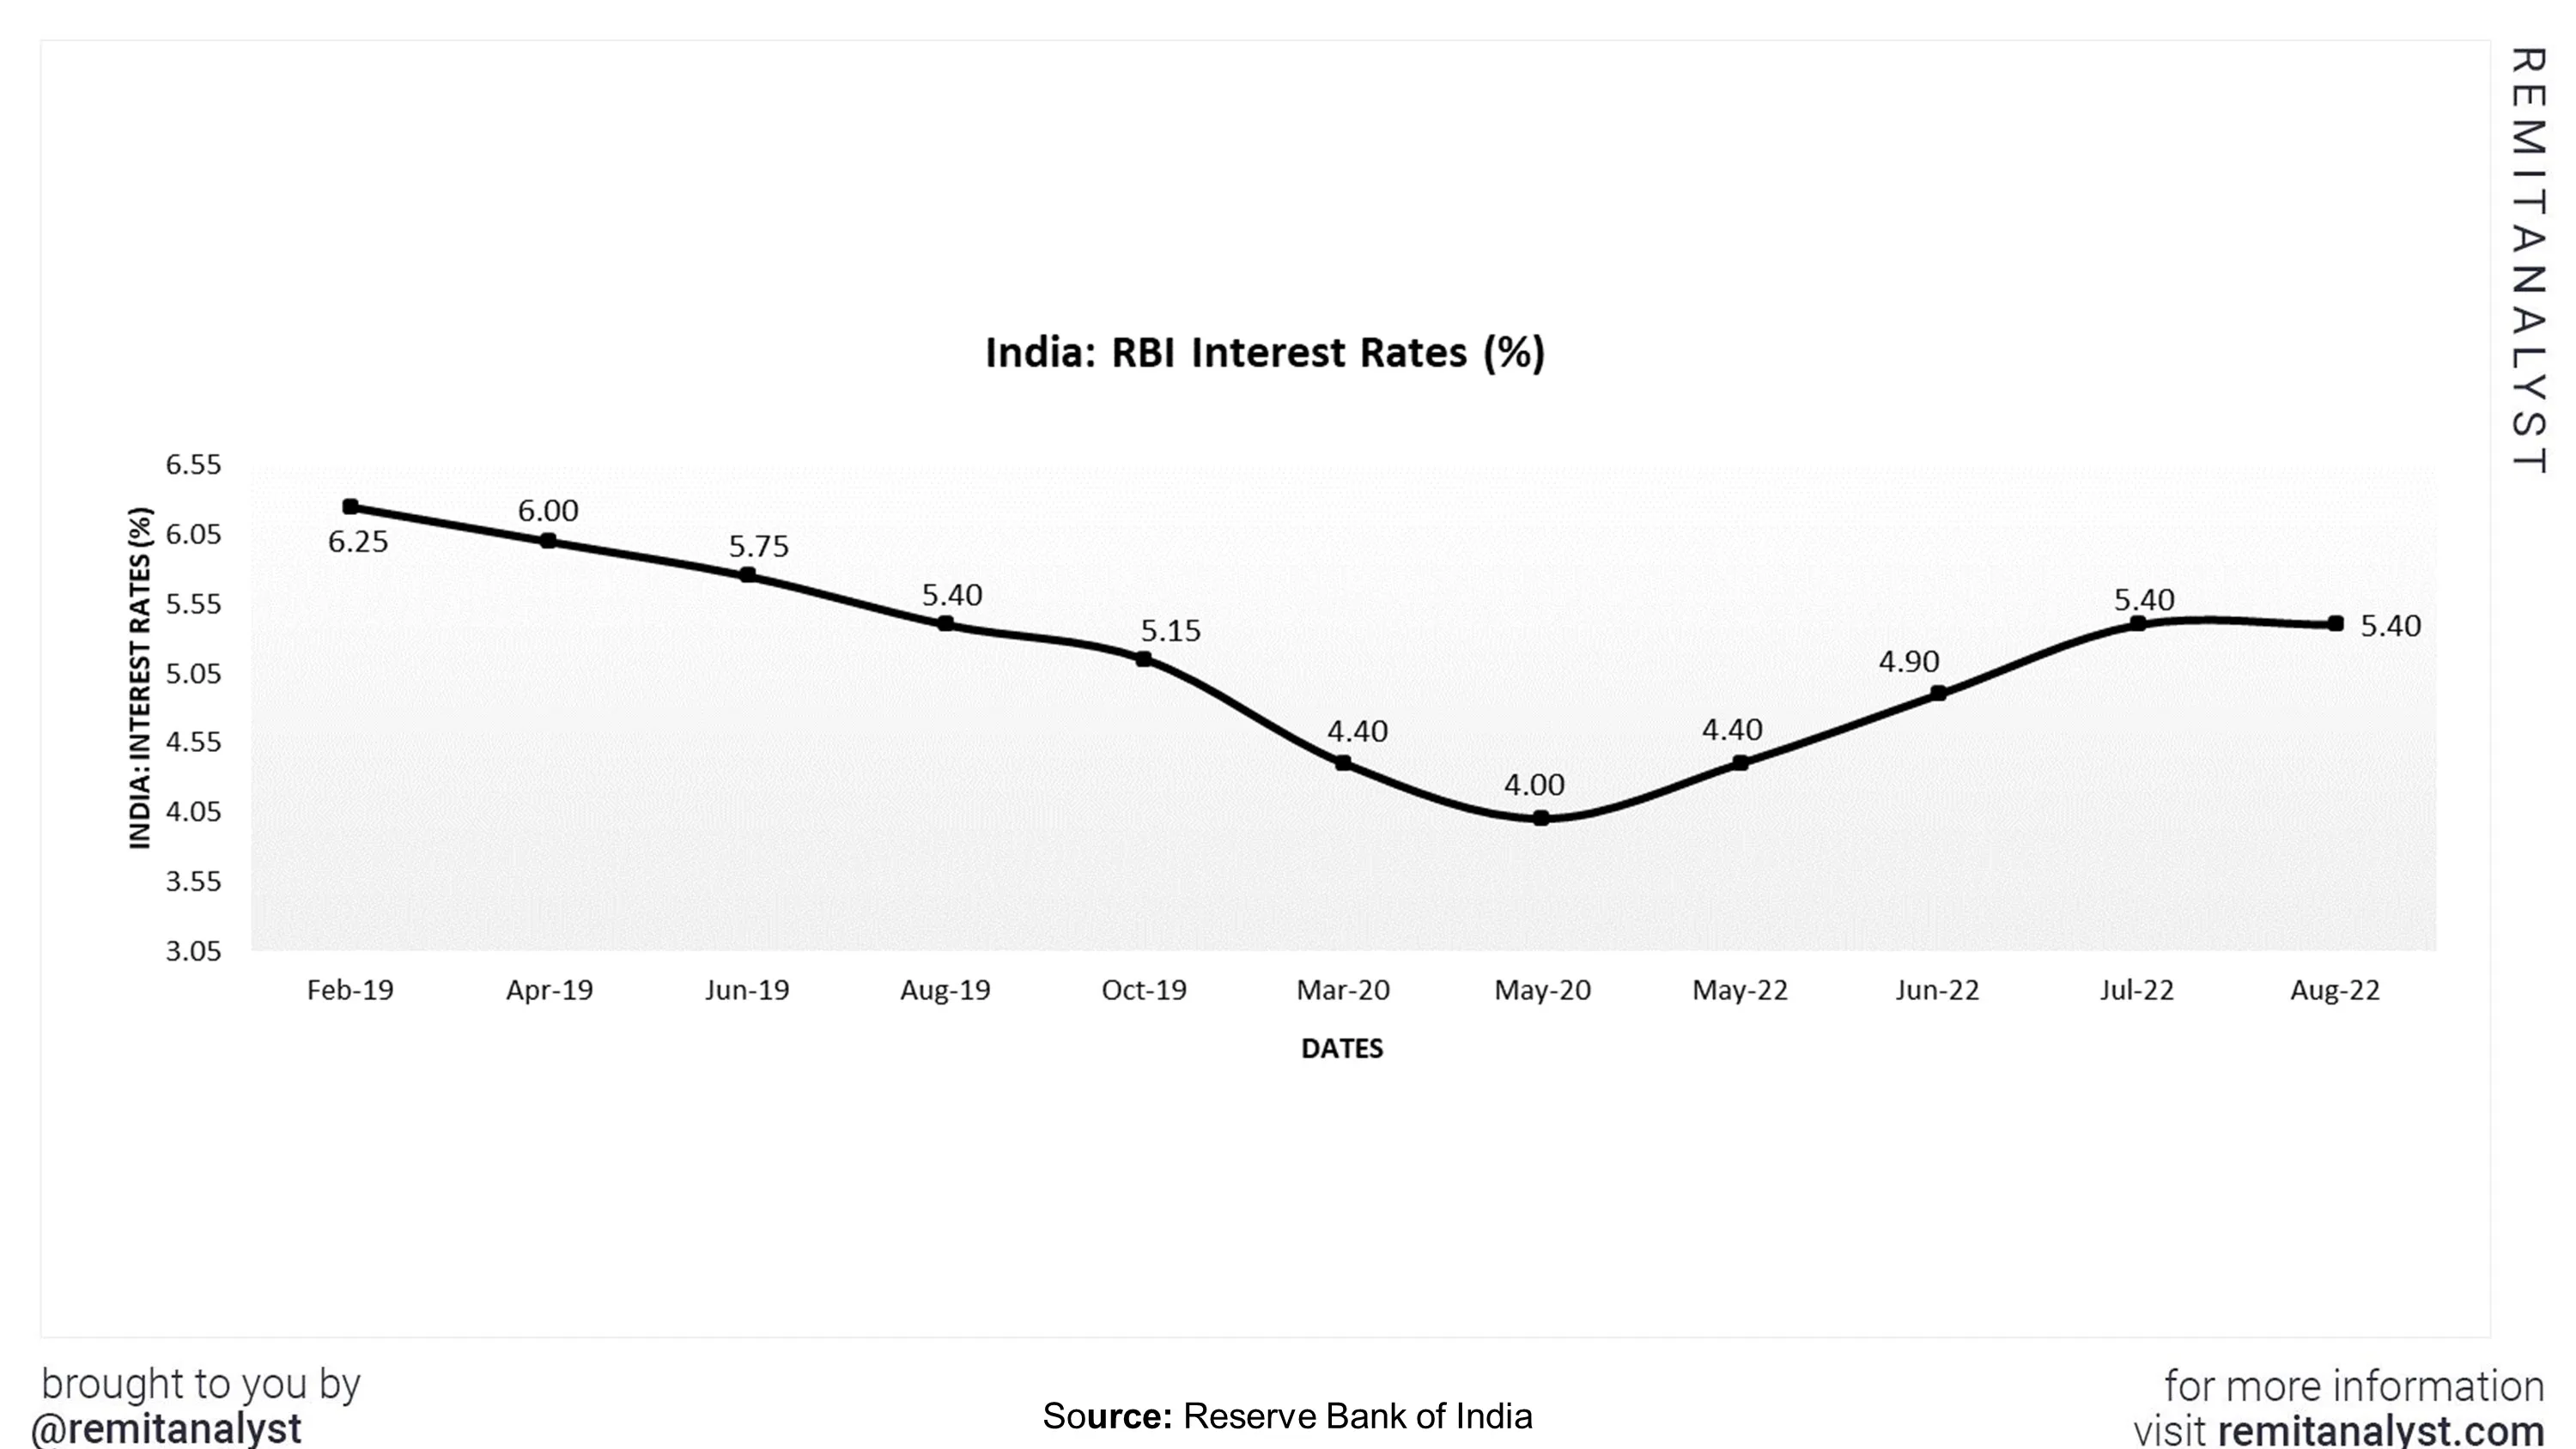 interest-rates-india-from-feb-2019-to-aug-2022